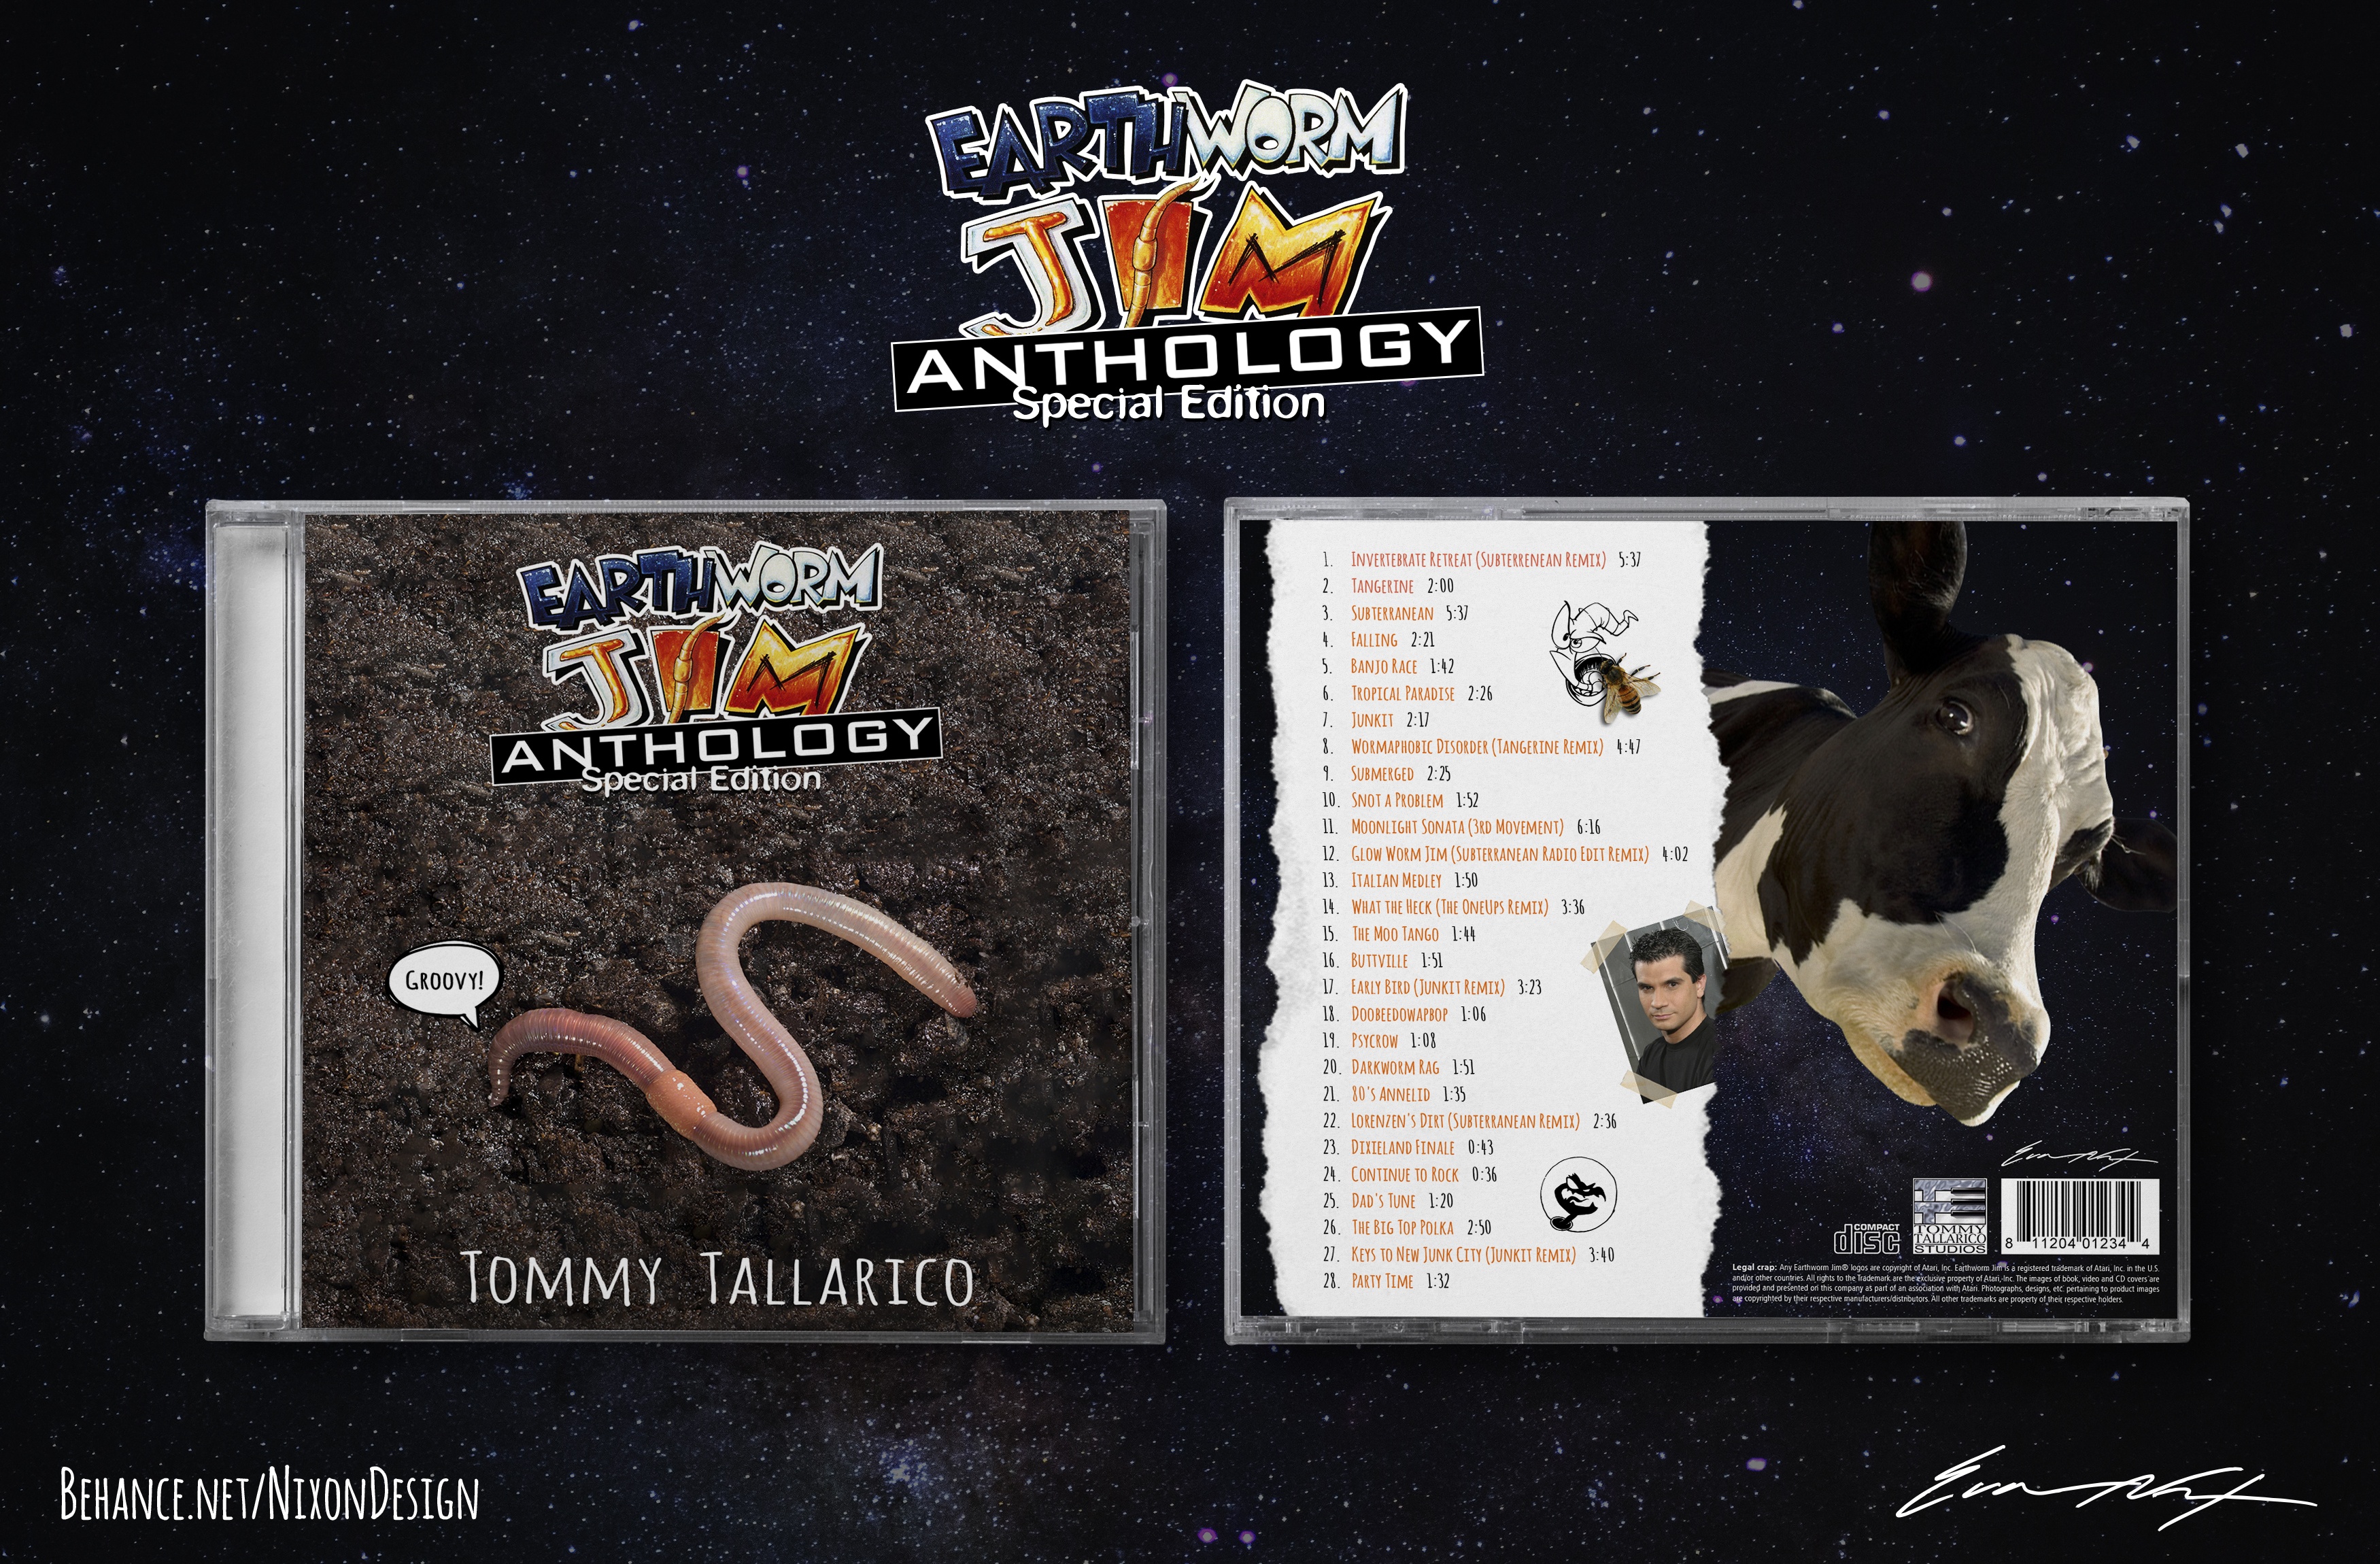 Earthworm Jim Anthology – Special Edition box cover